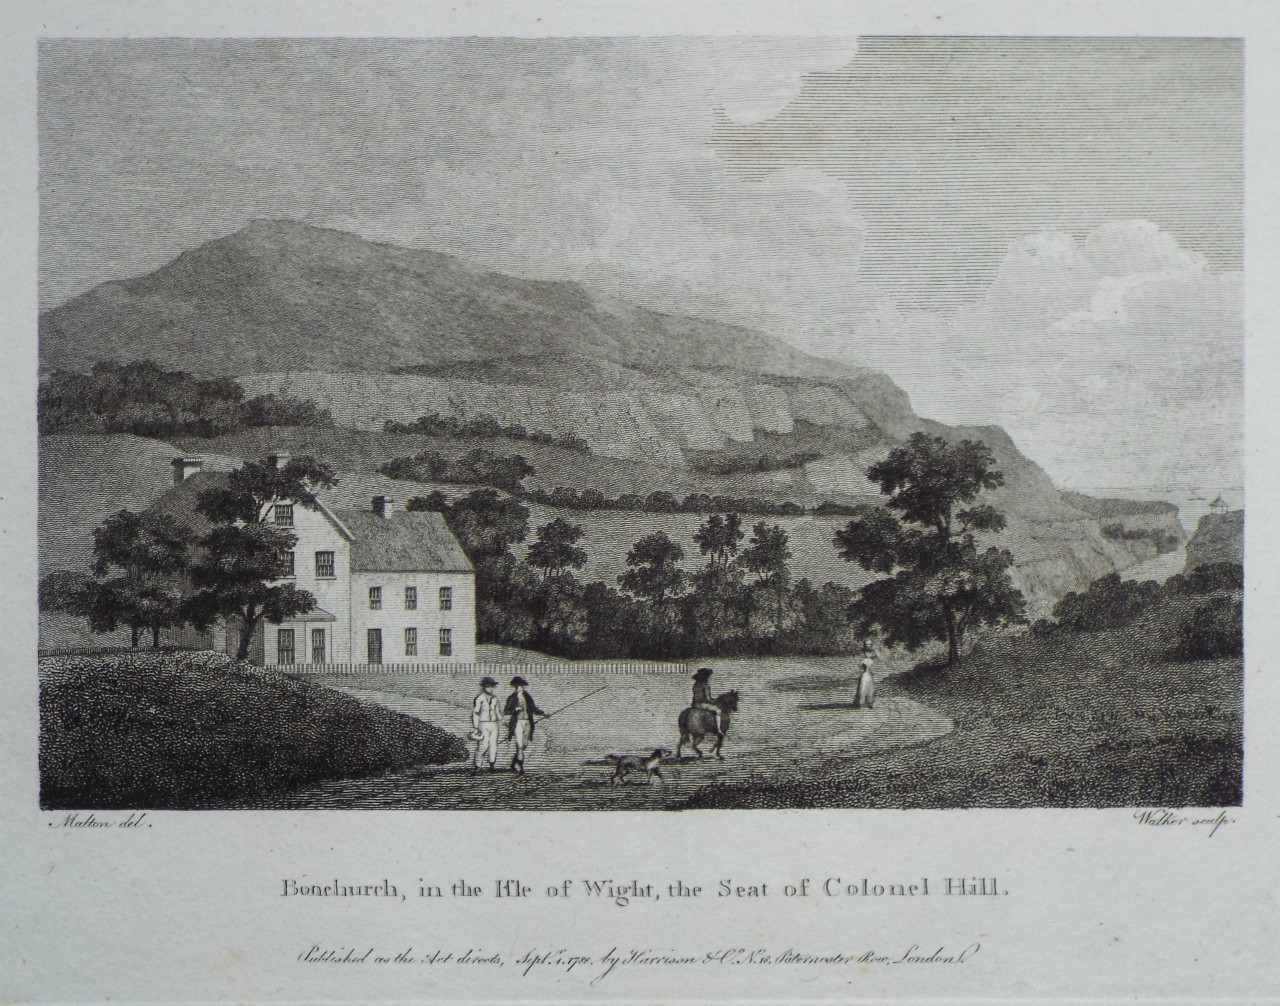 Print - Bonchurch, in the Isle of Wight, the Seat of Colonel Hill. - 